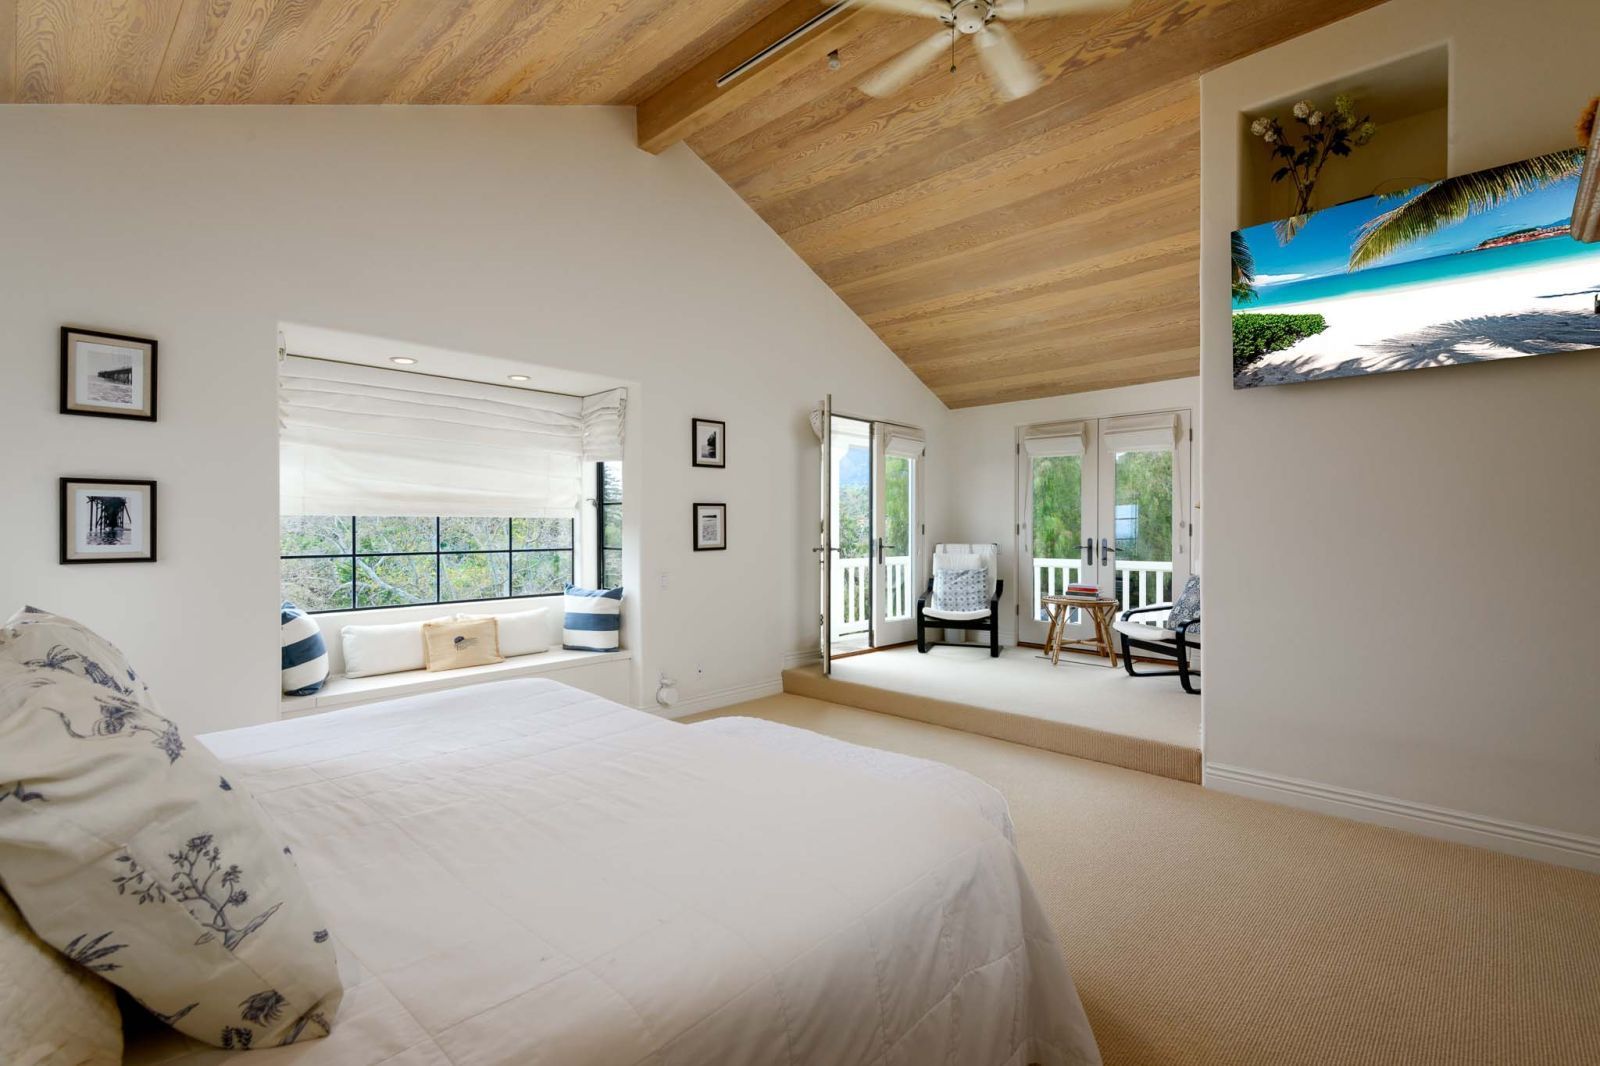 A luxury bedroom of a home for lease in Santa BarbARA.